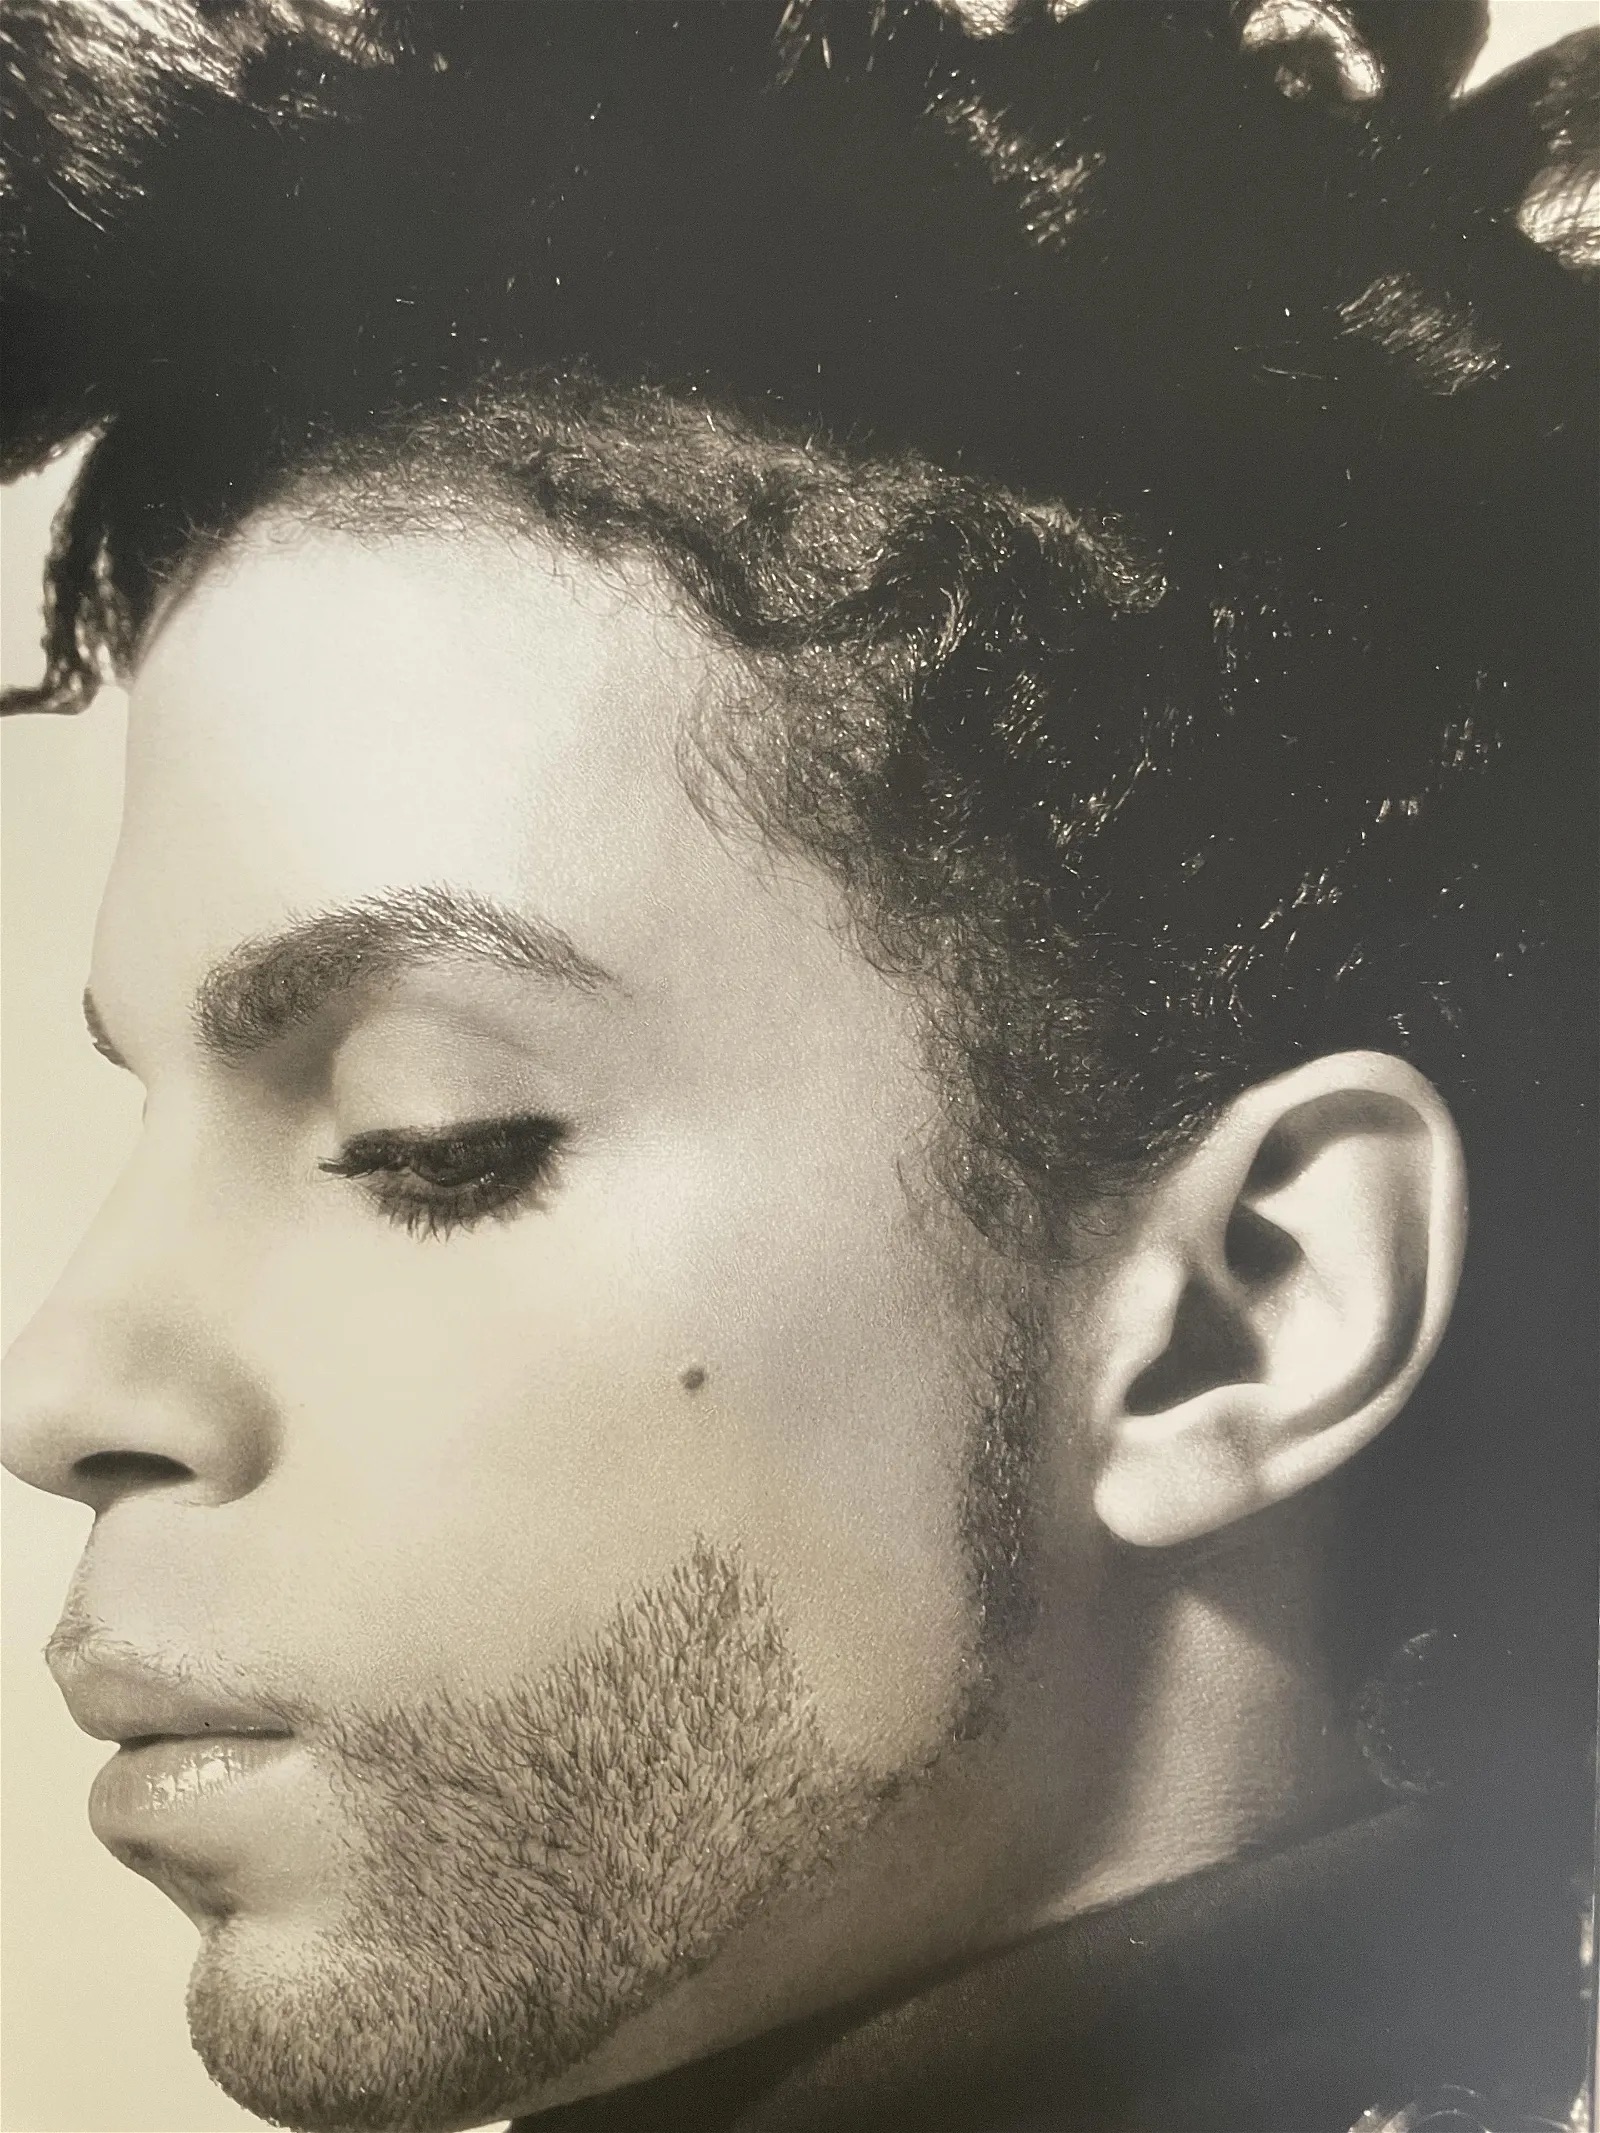 Herb Ritts "Prince, Minneapolis, 1991" Print - Image 2 of 6